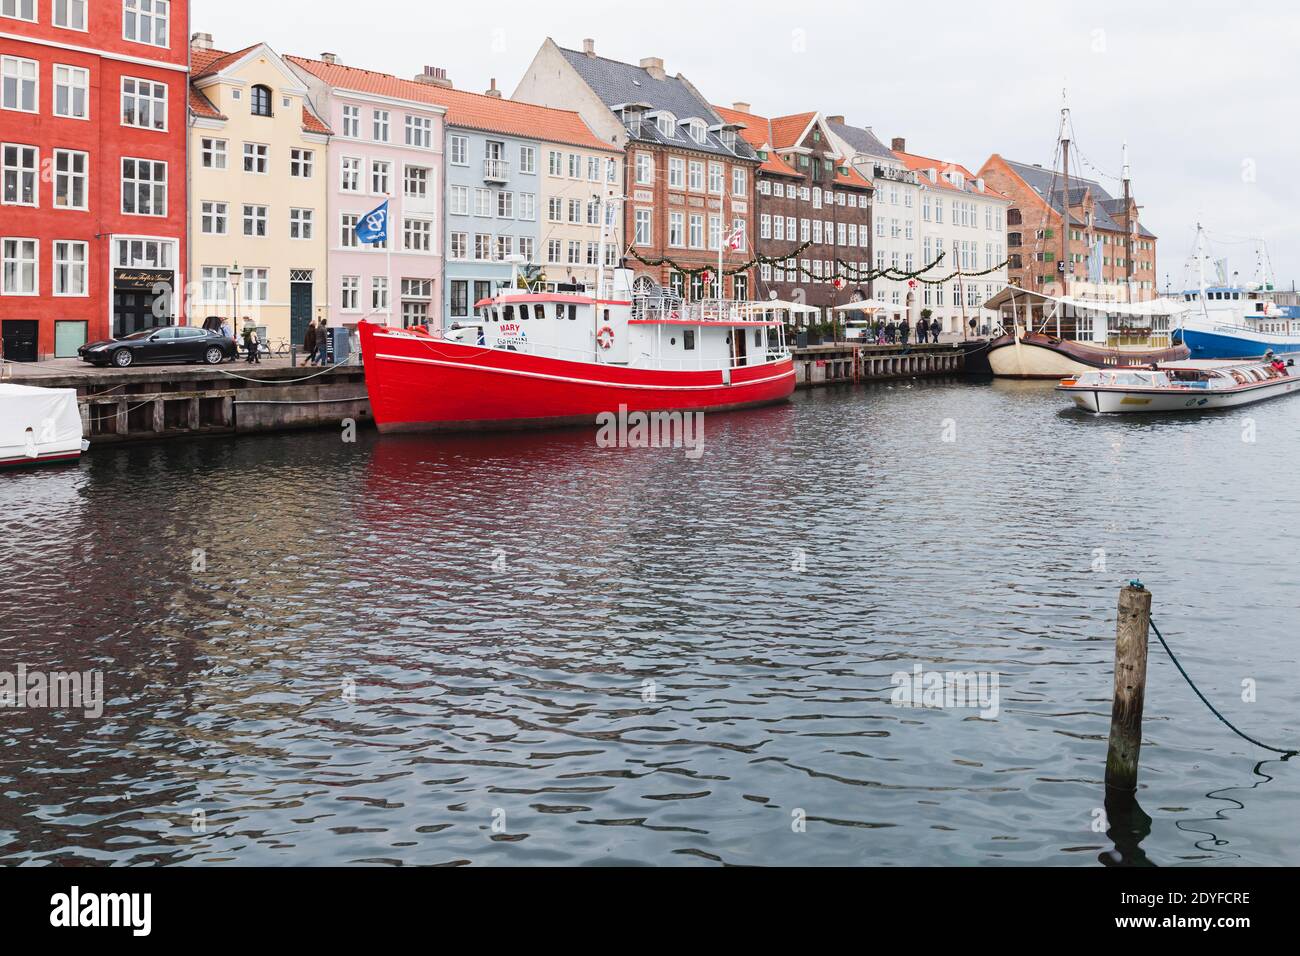 Copenhagen, Denmark - December 10, 2017: Coastal view of Nyhavn or New Harbour, it is a 17th-century waterfront, canal and popular touristic district. Stock Photo